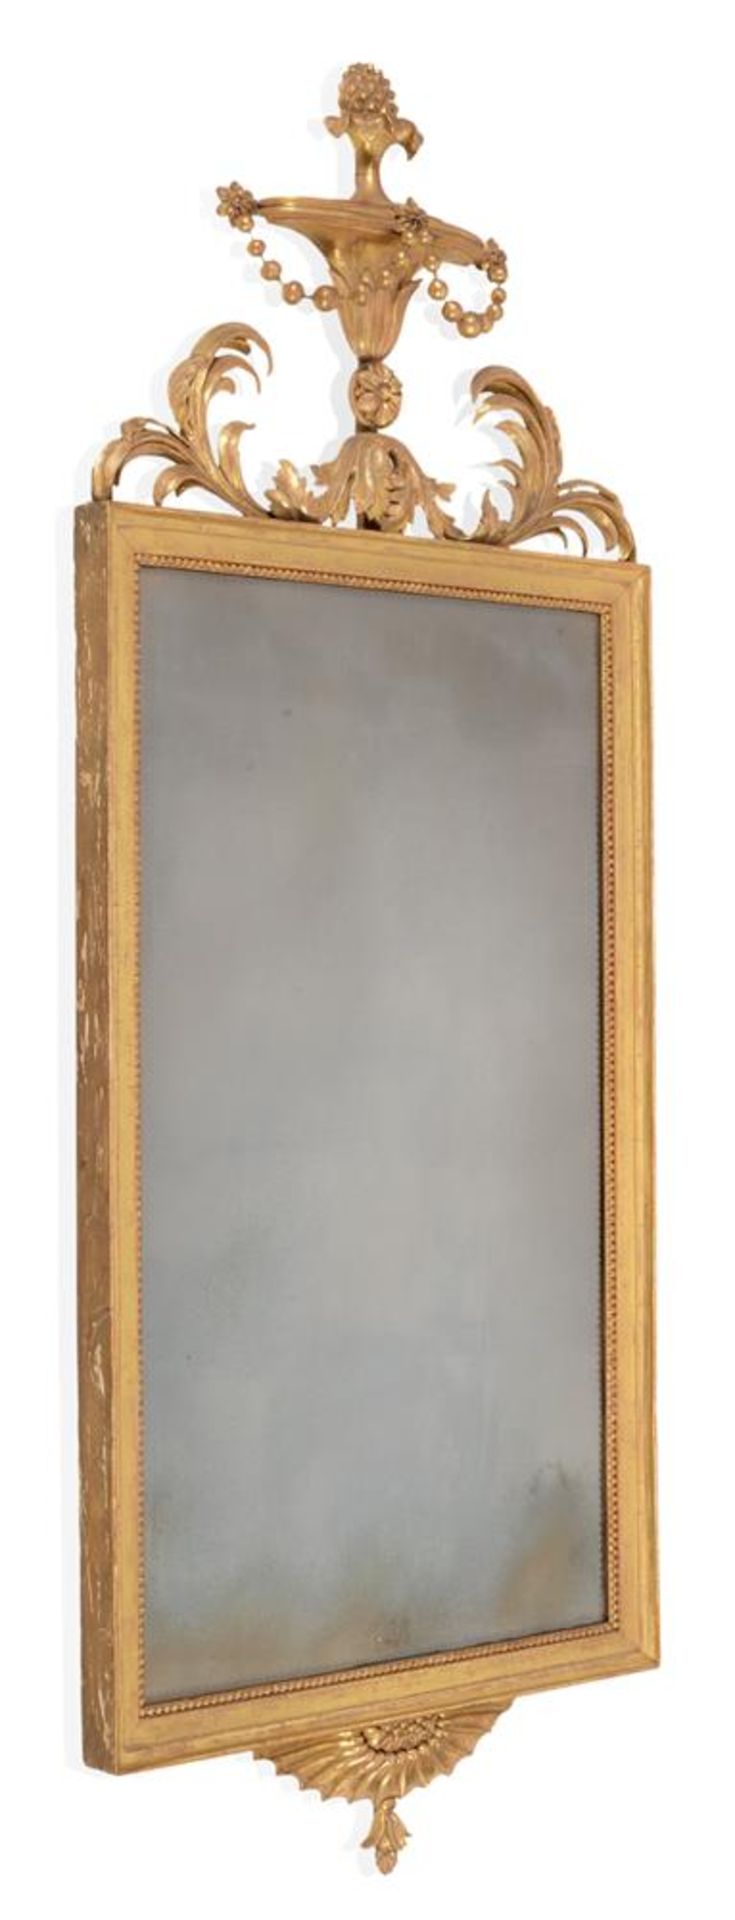 A GEORGE III CARVED GILTWOOD WALL MIRROR, IN THE MANNER OF ROBERT ADAM, CIRCA 1790 - Image 2 of 5